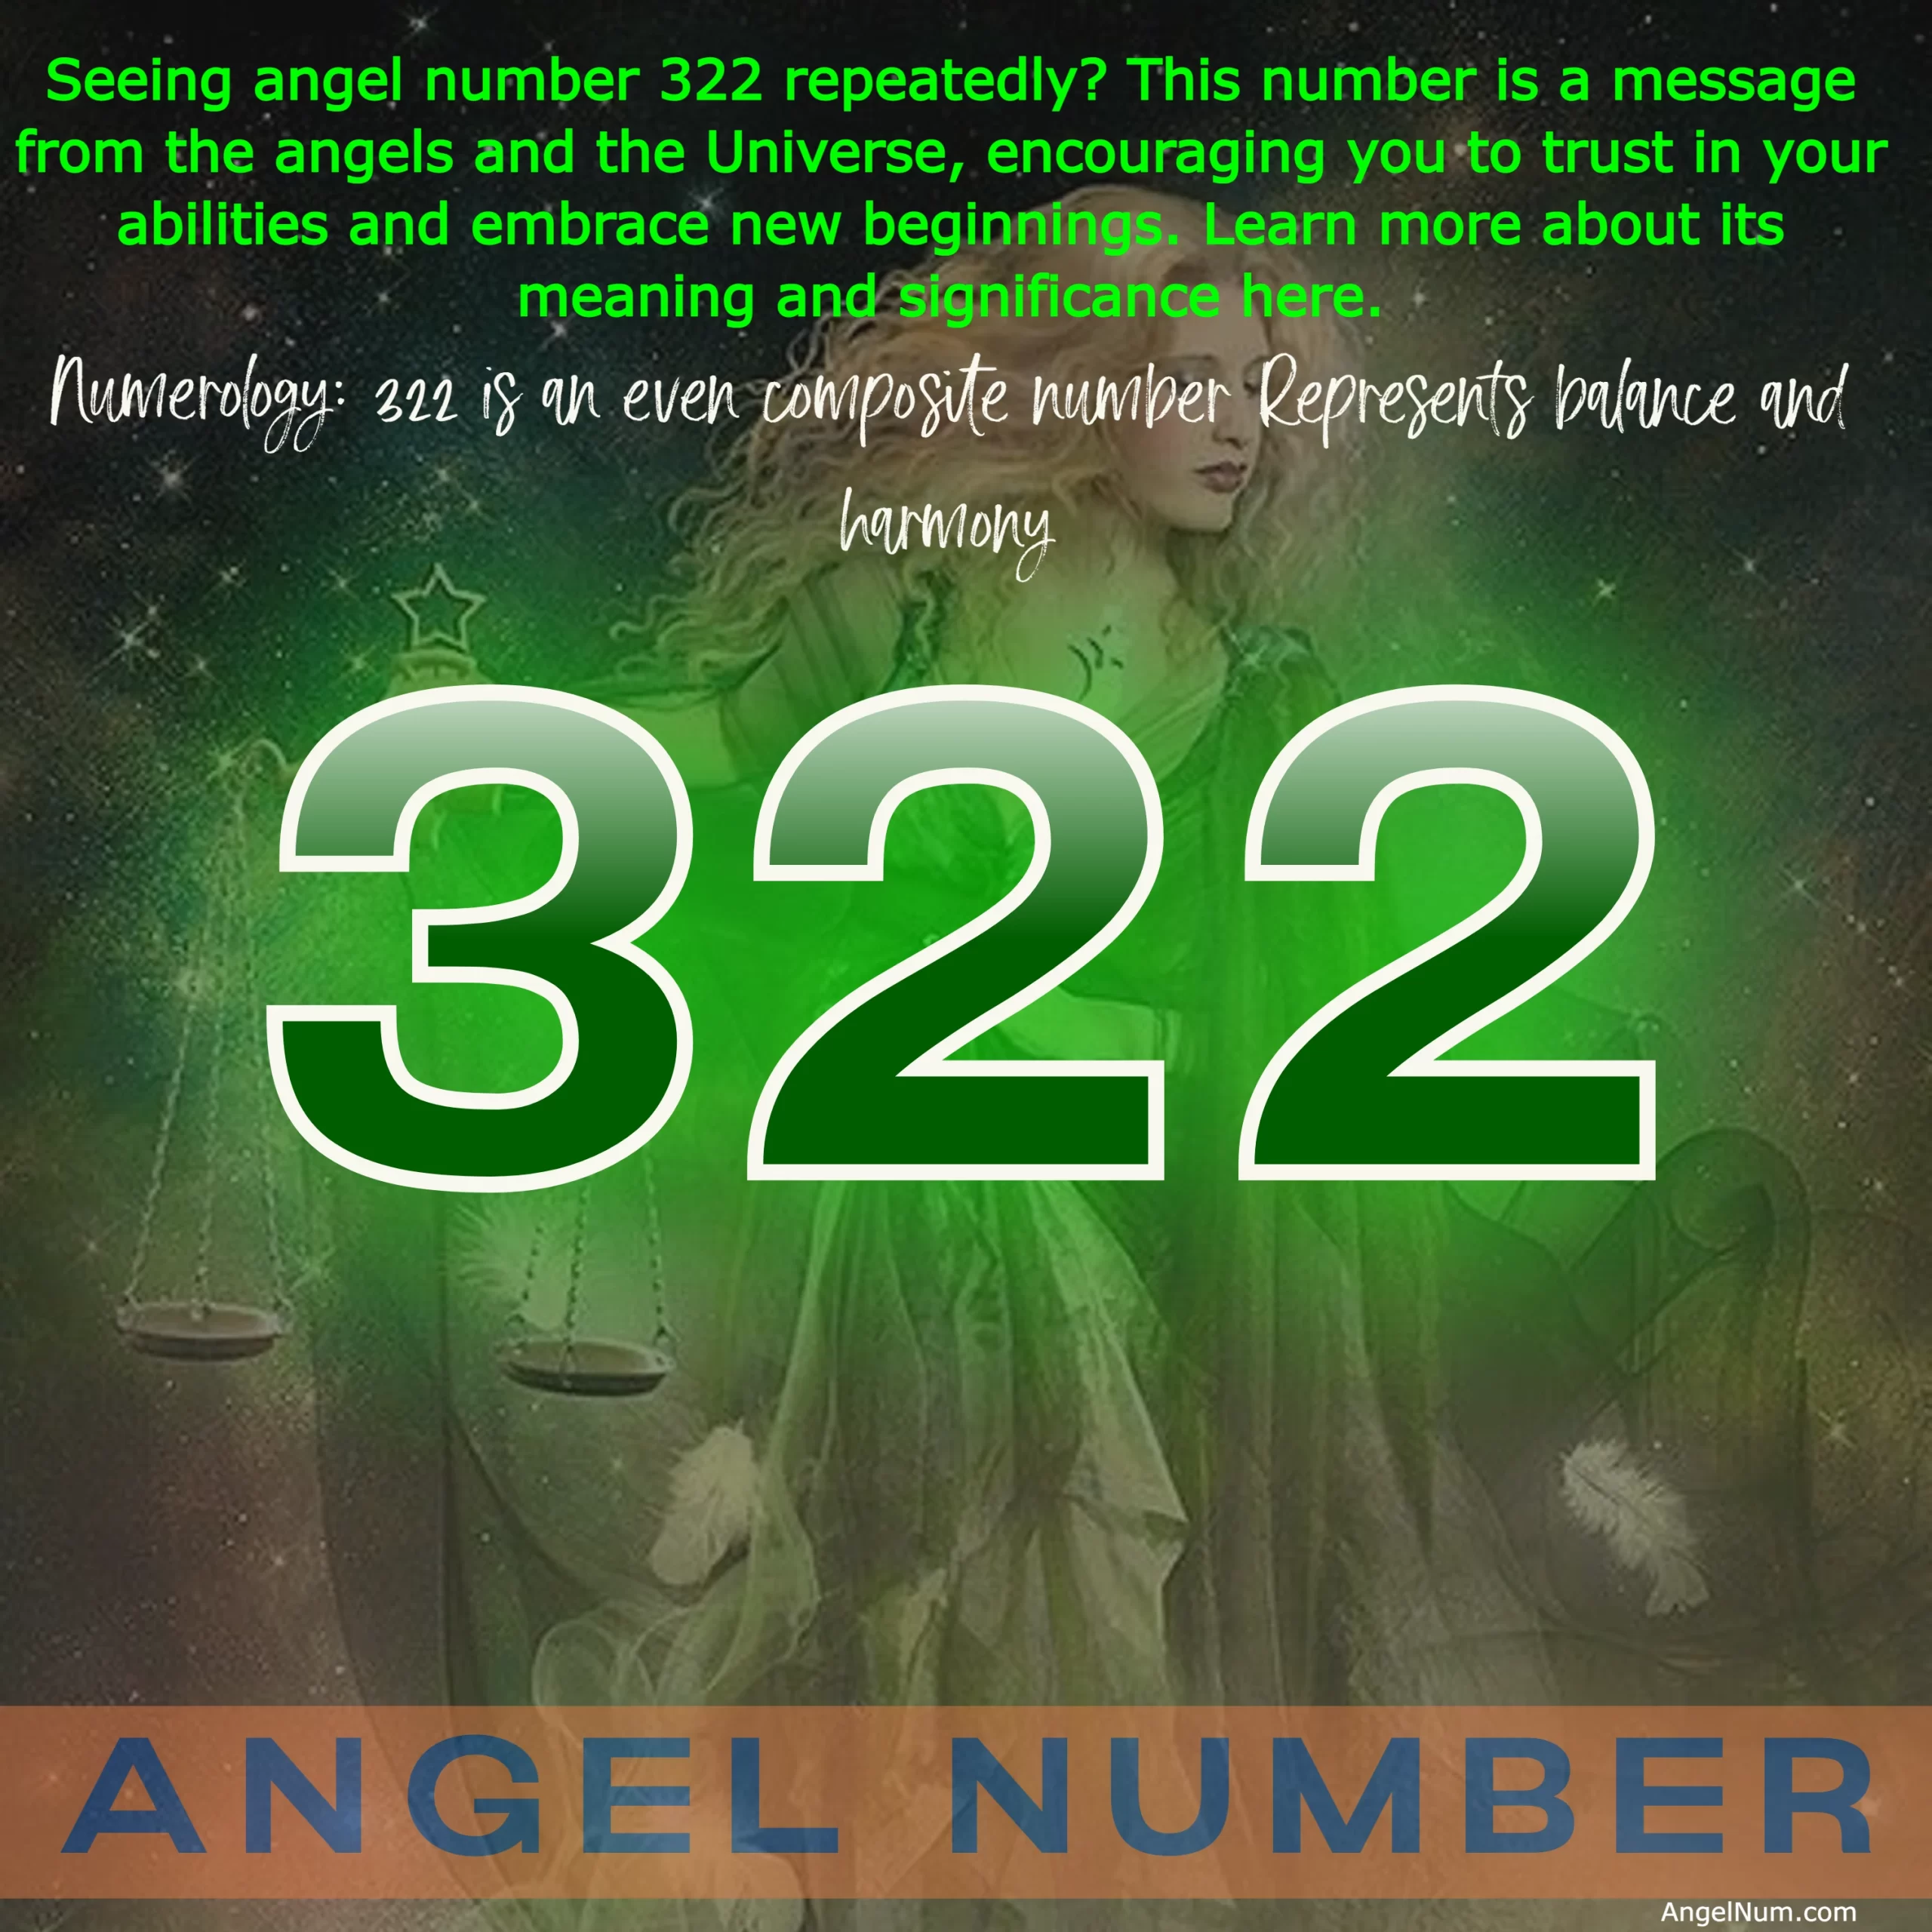 Angel Number 322: Trust, Balance, and New Beginnings